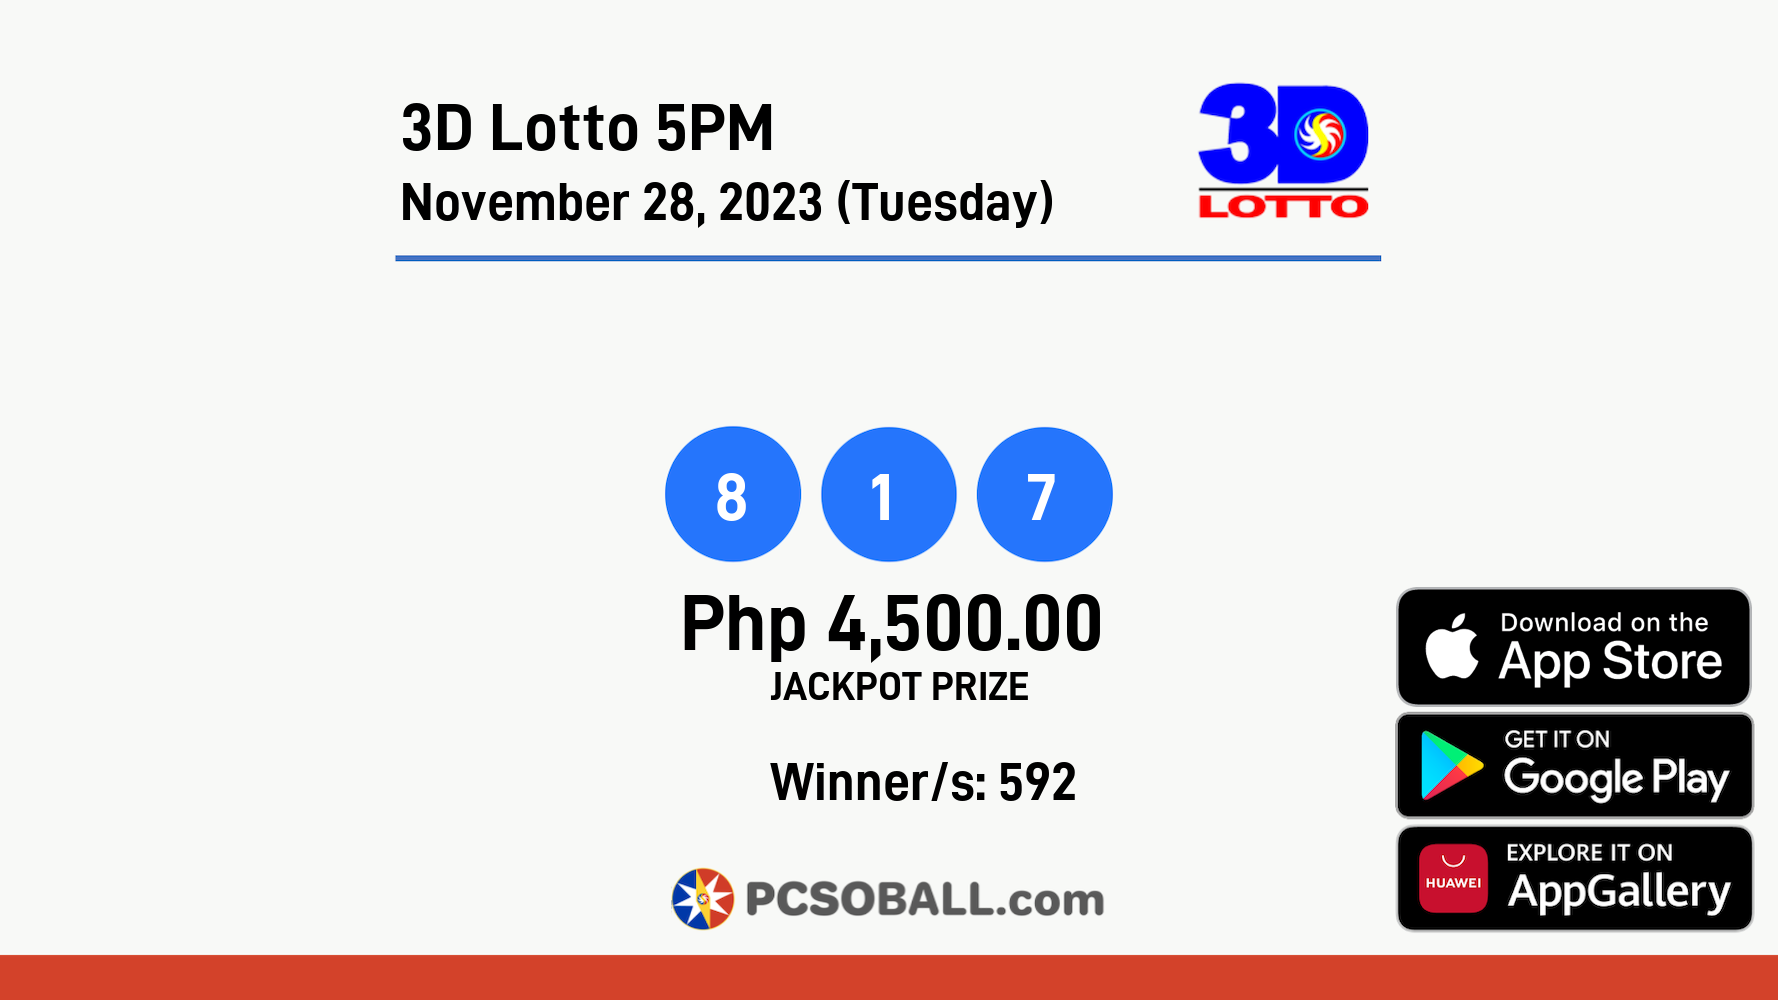 3D Lotto 5PM November 28, 2023 (Tuesday) Result